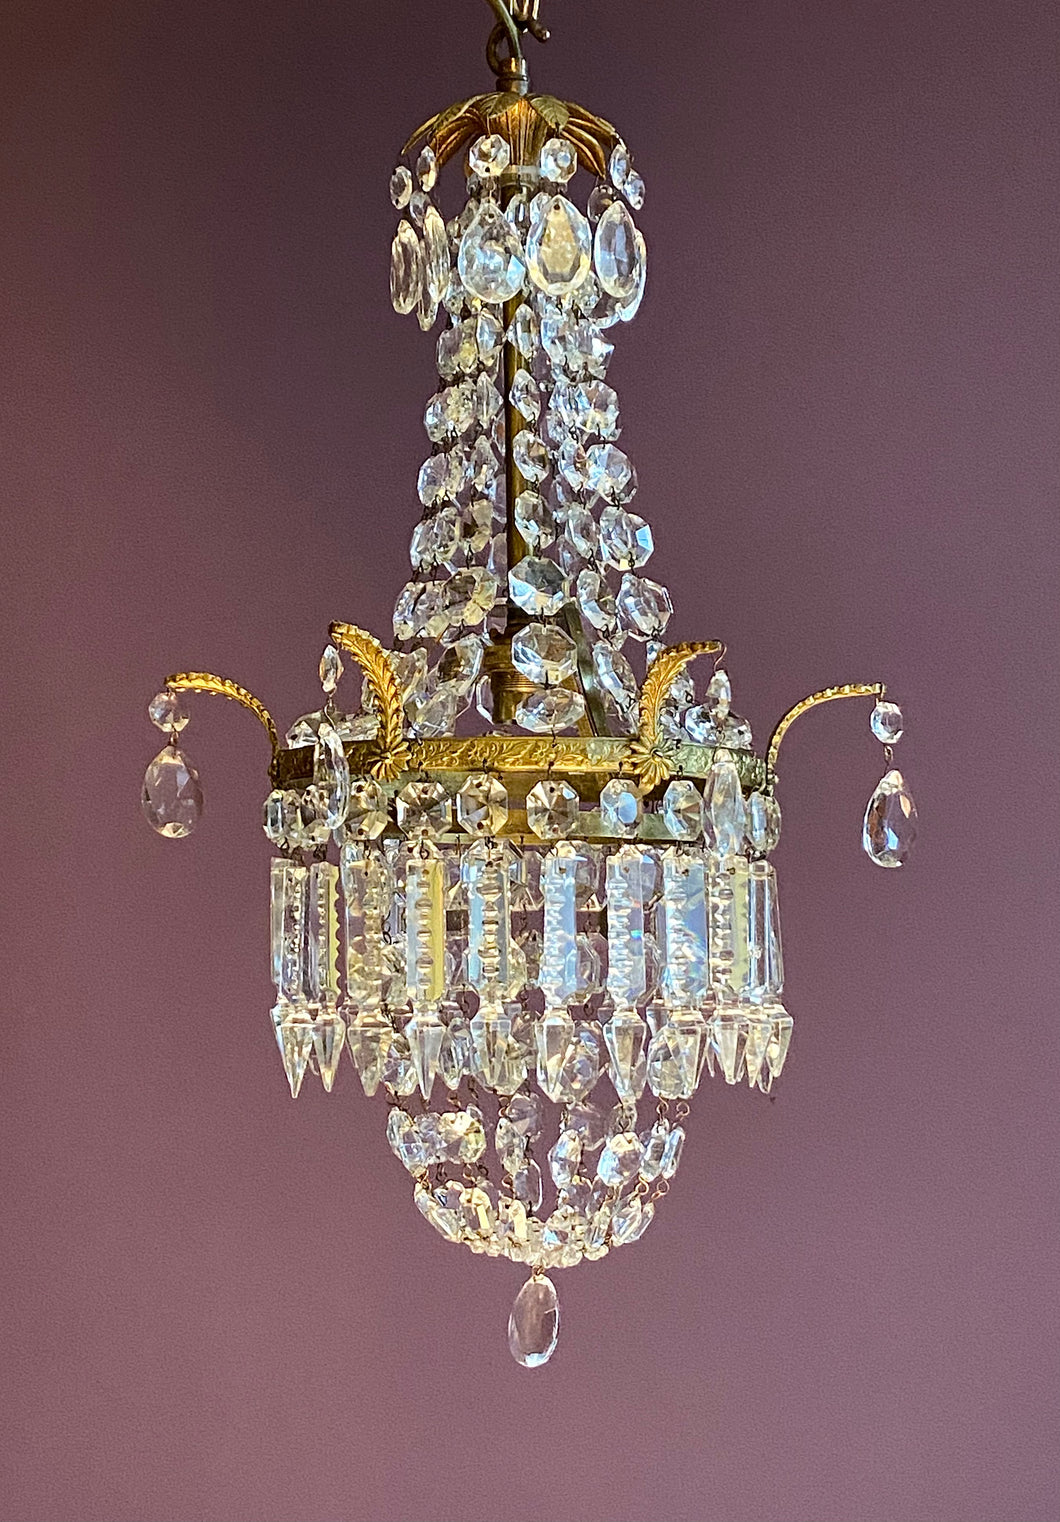 French 'Pineapple' Empire  Chandelier